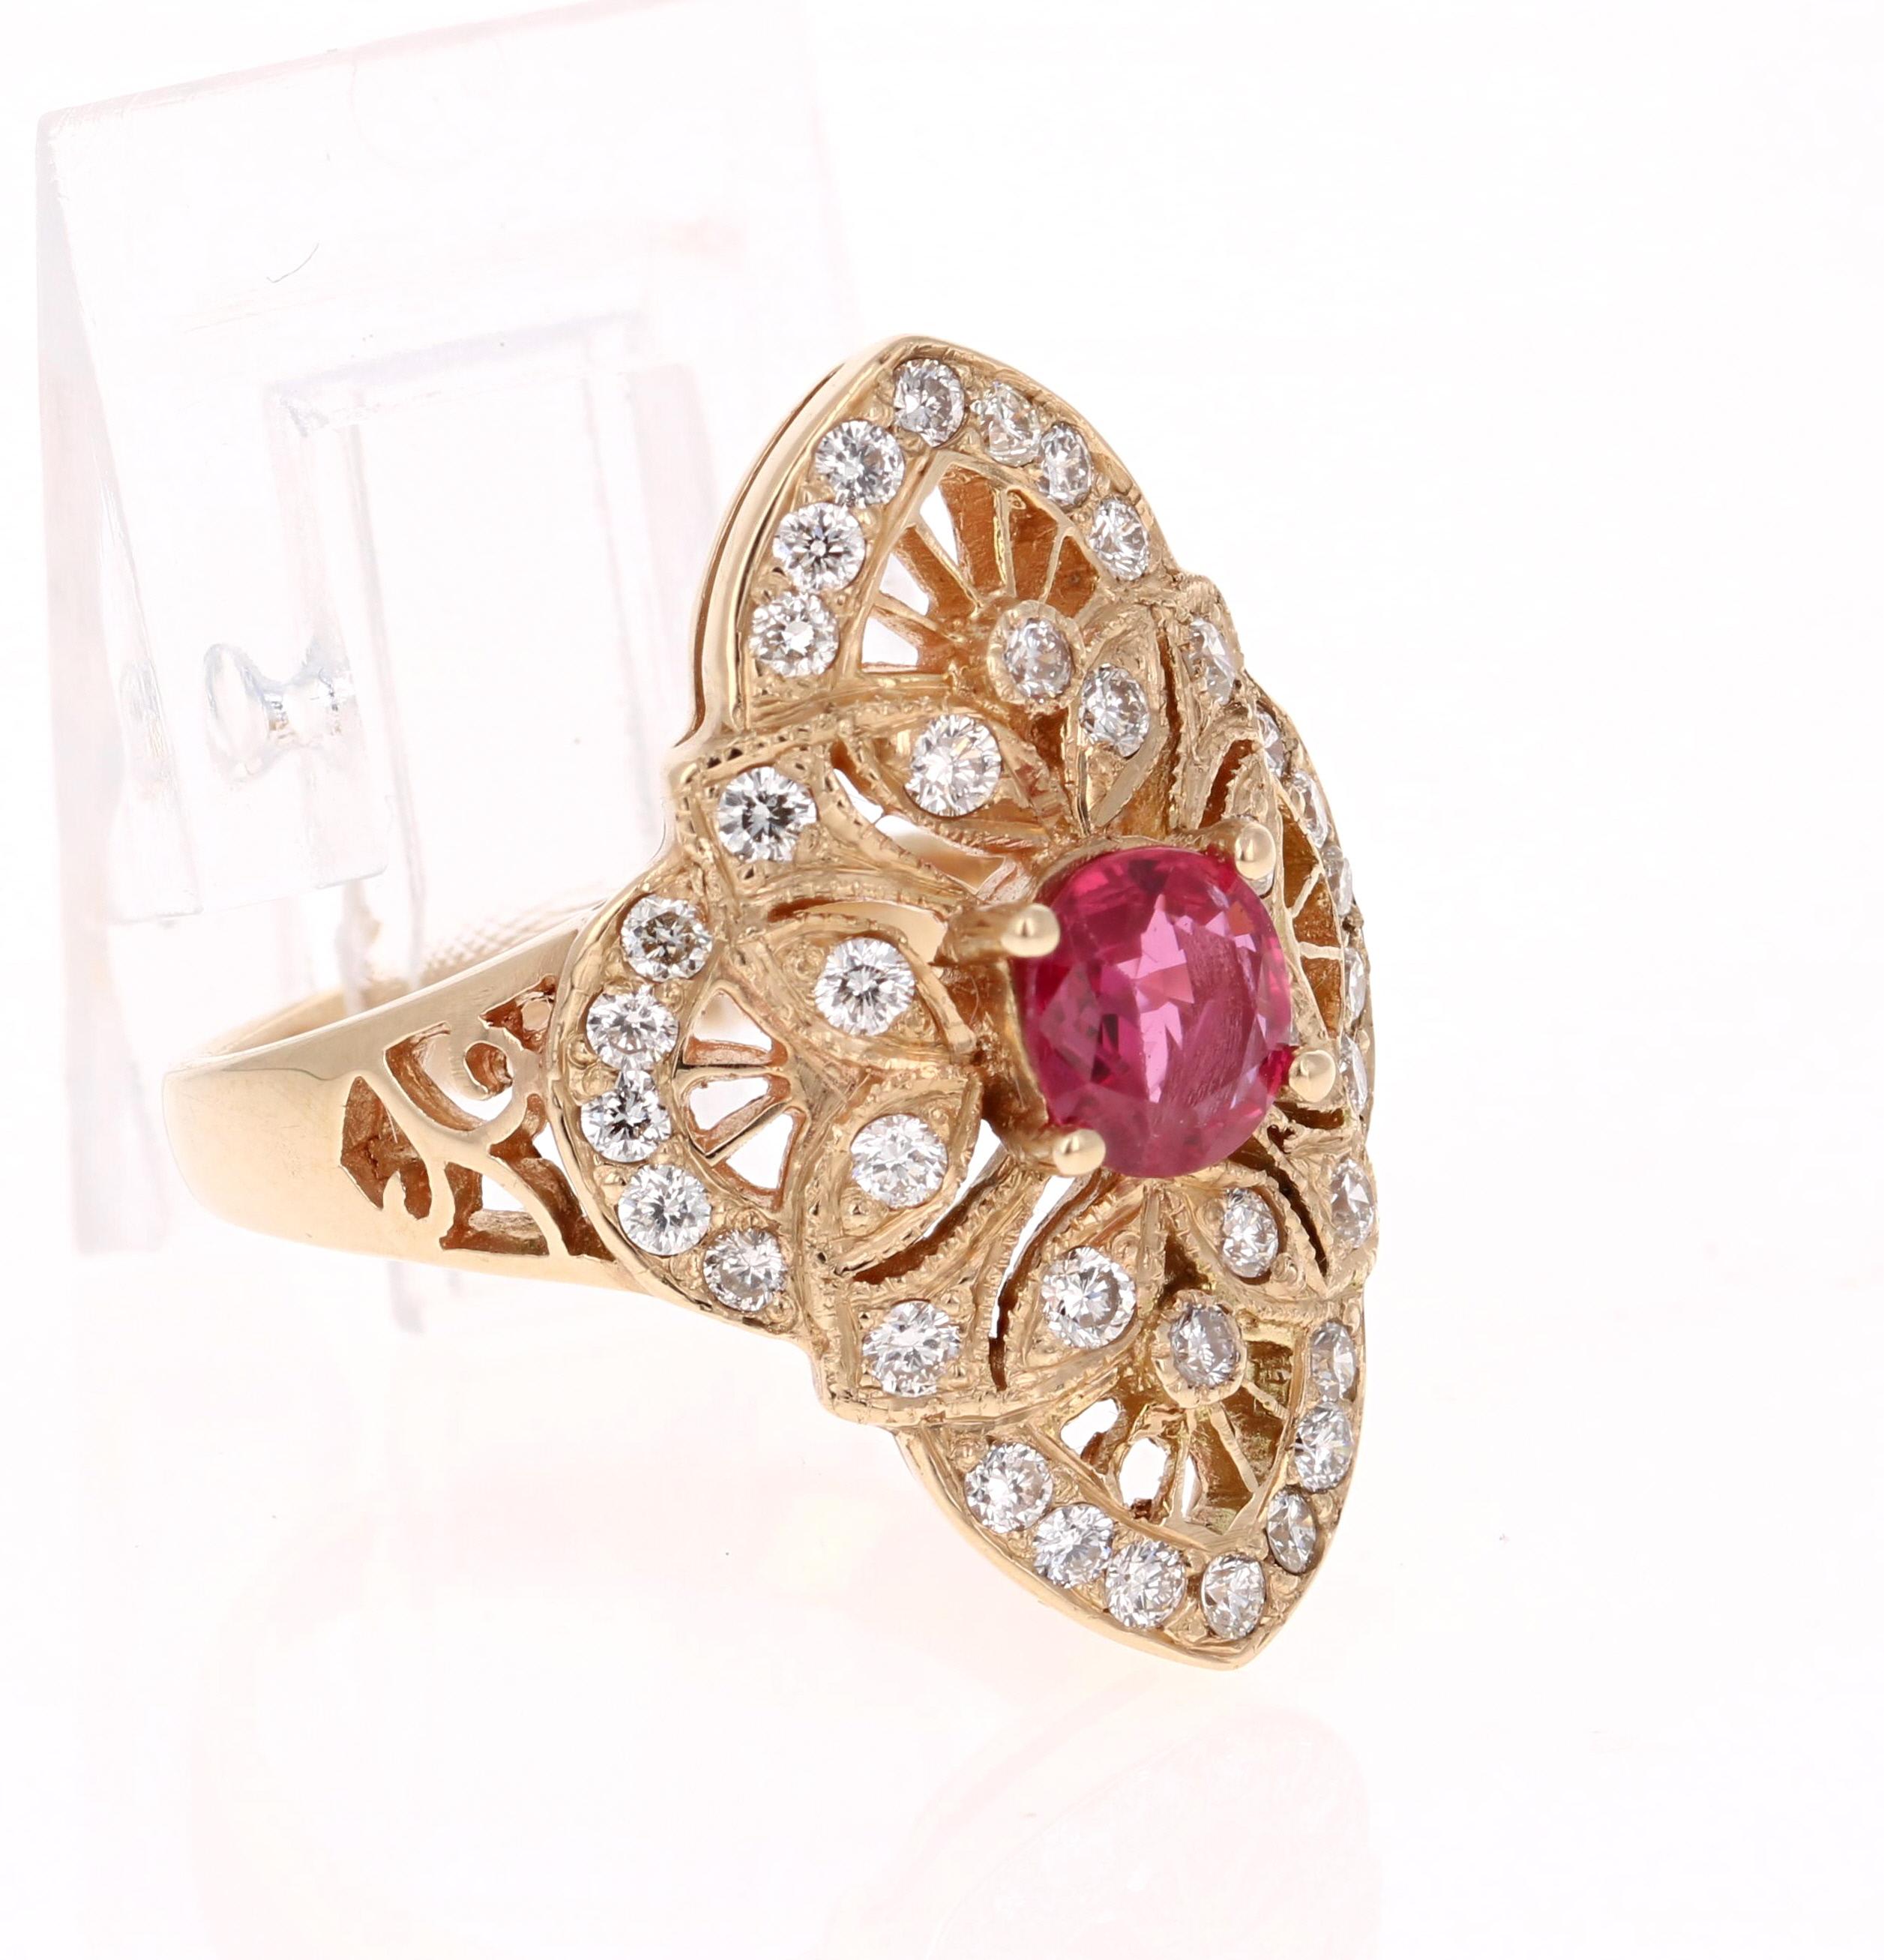 This ring has an Oval Cut Ruby that weighs 0.65 carats and 38 Round Cut Diamonds that weigh 0.69 carats with a clarity and color of VS-H. The Ruby measures at 5 mm. 

The ring is casted in 14K Yellow Gold and weighs approximately 7.3 grams. The